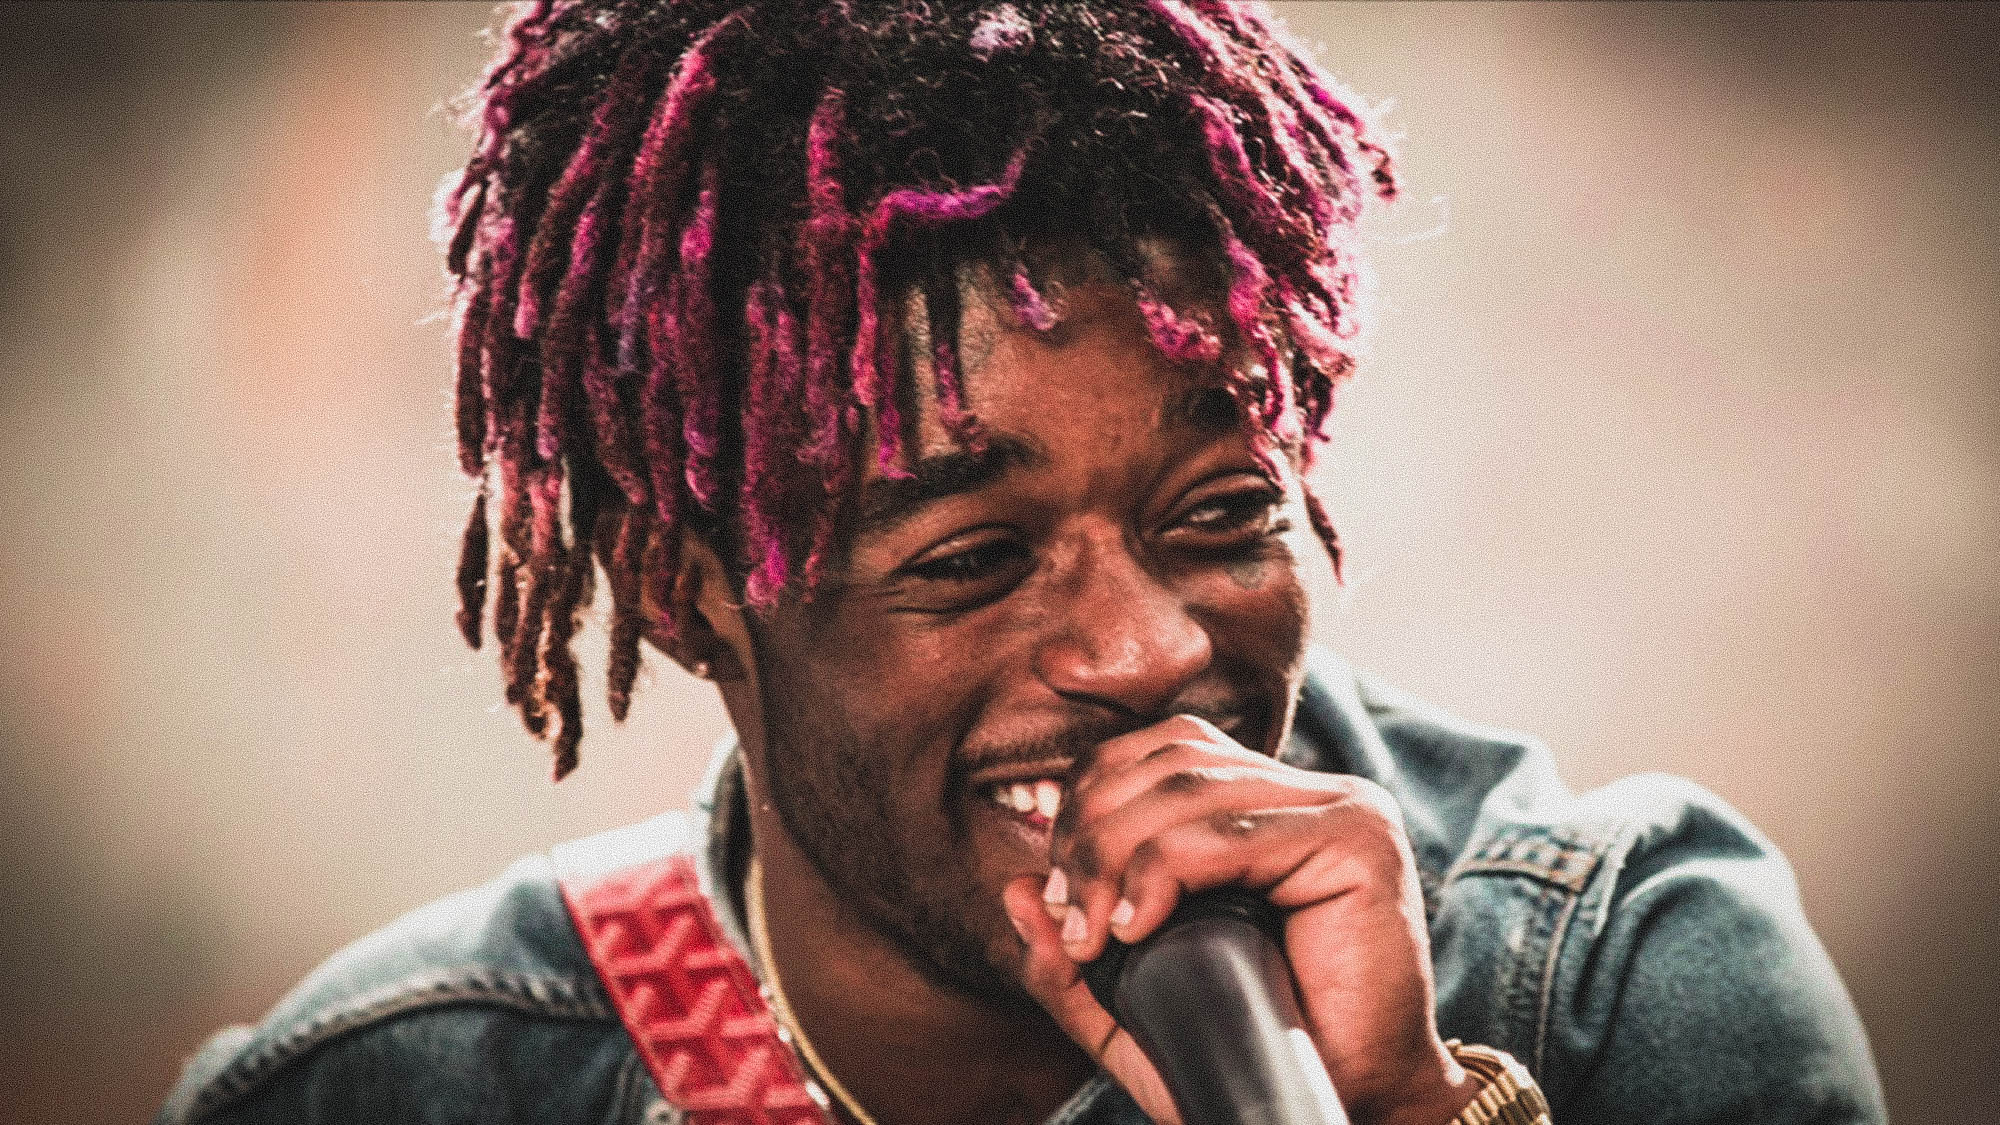 Student waiting on Lil Uzi Vert to pay his $90,000 college debt